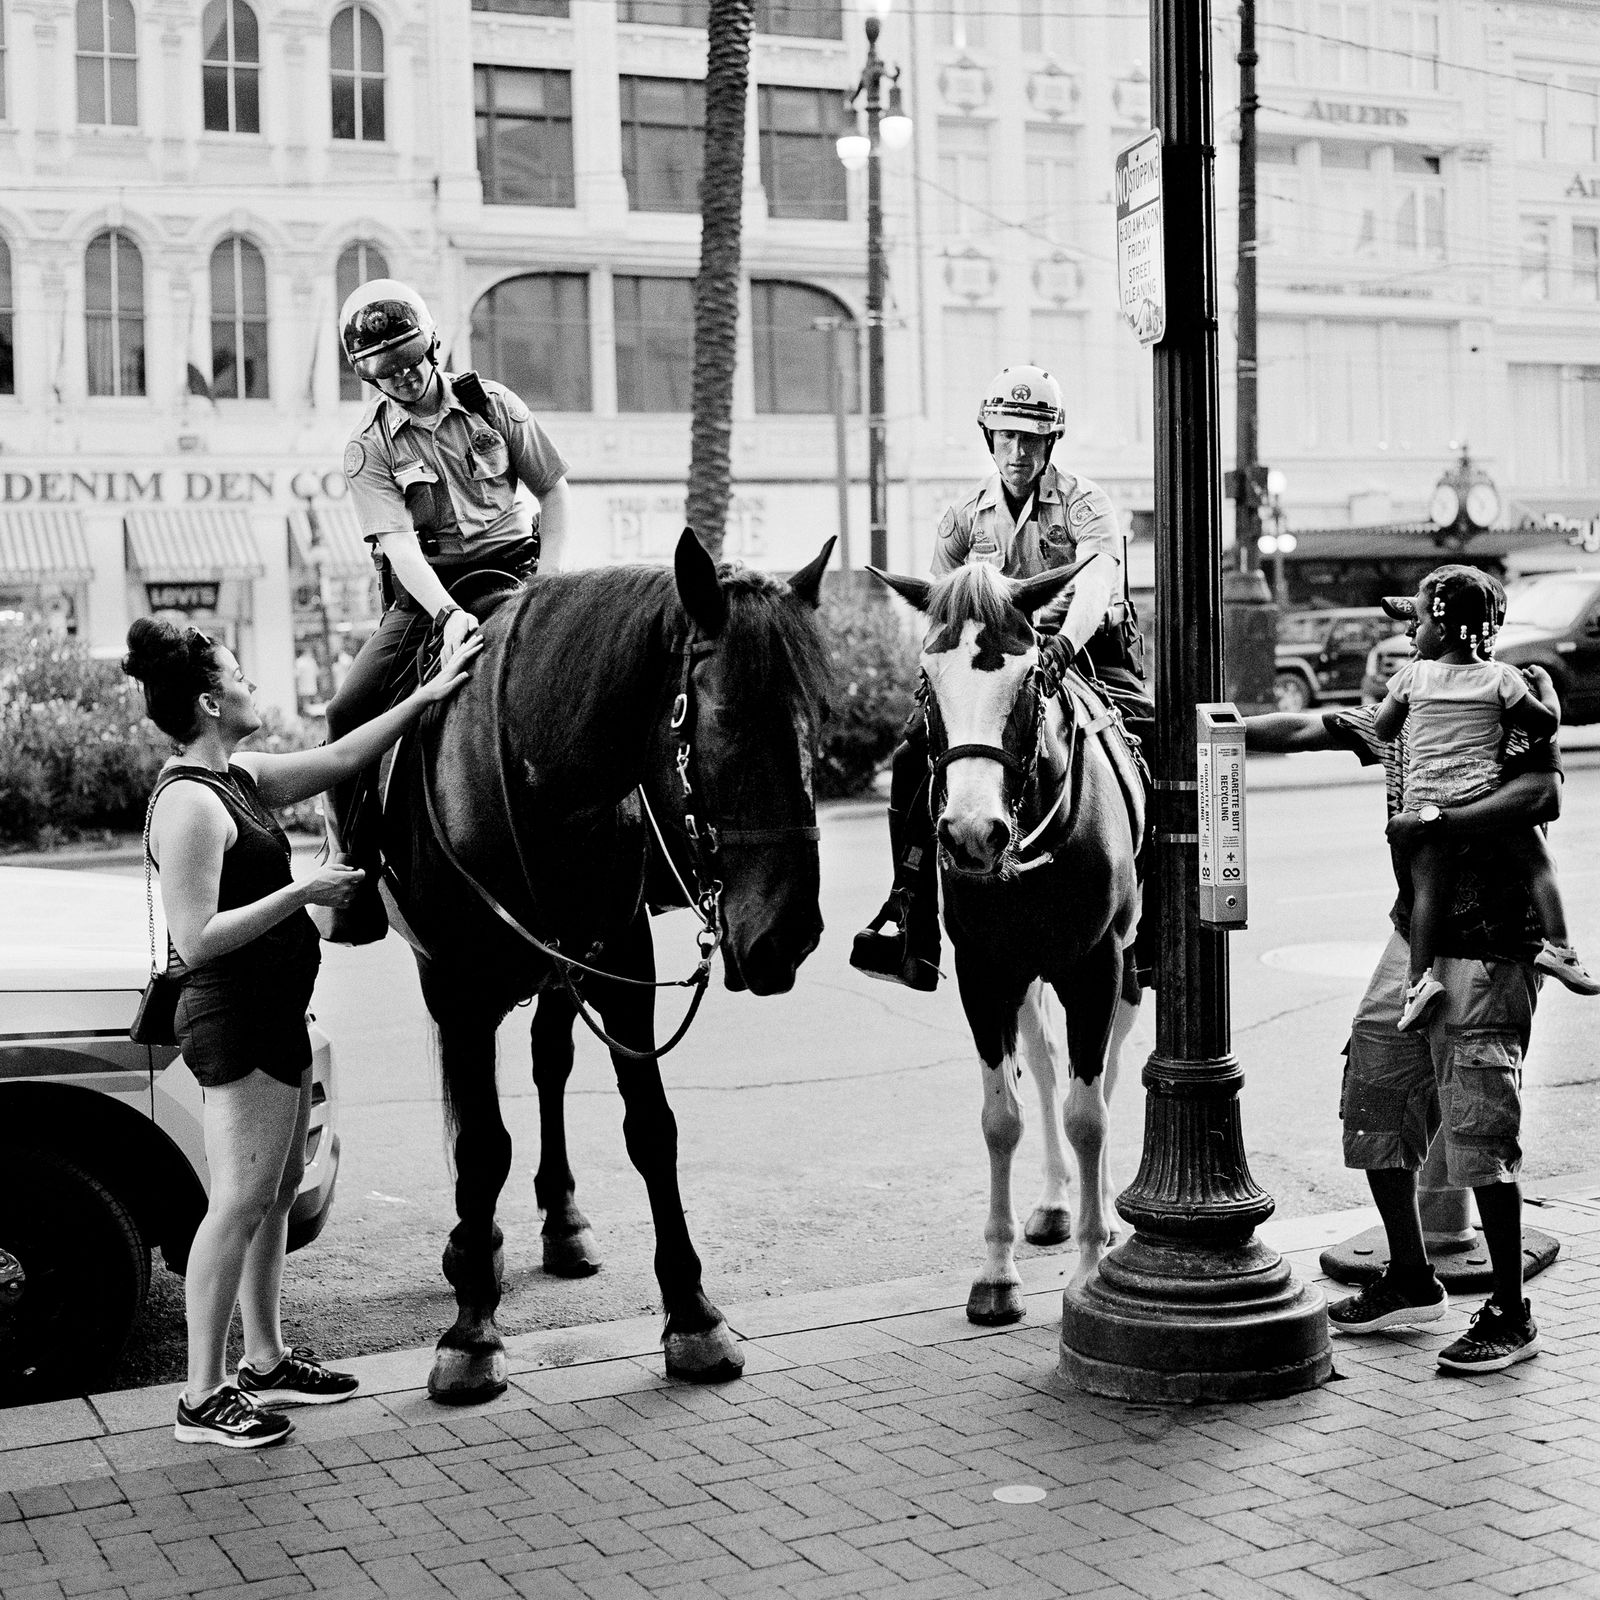 © Jonathan Traviesa - "Petting with Mounted Police" (from LOW HUSTLE HOT CENTER)